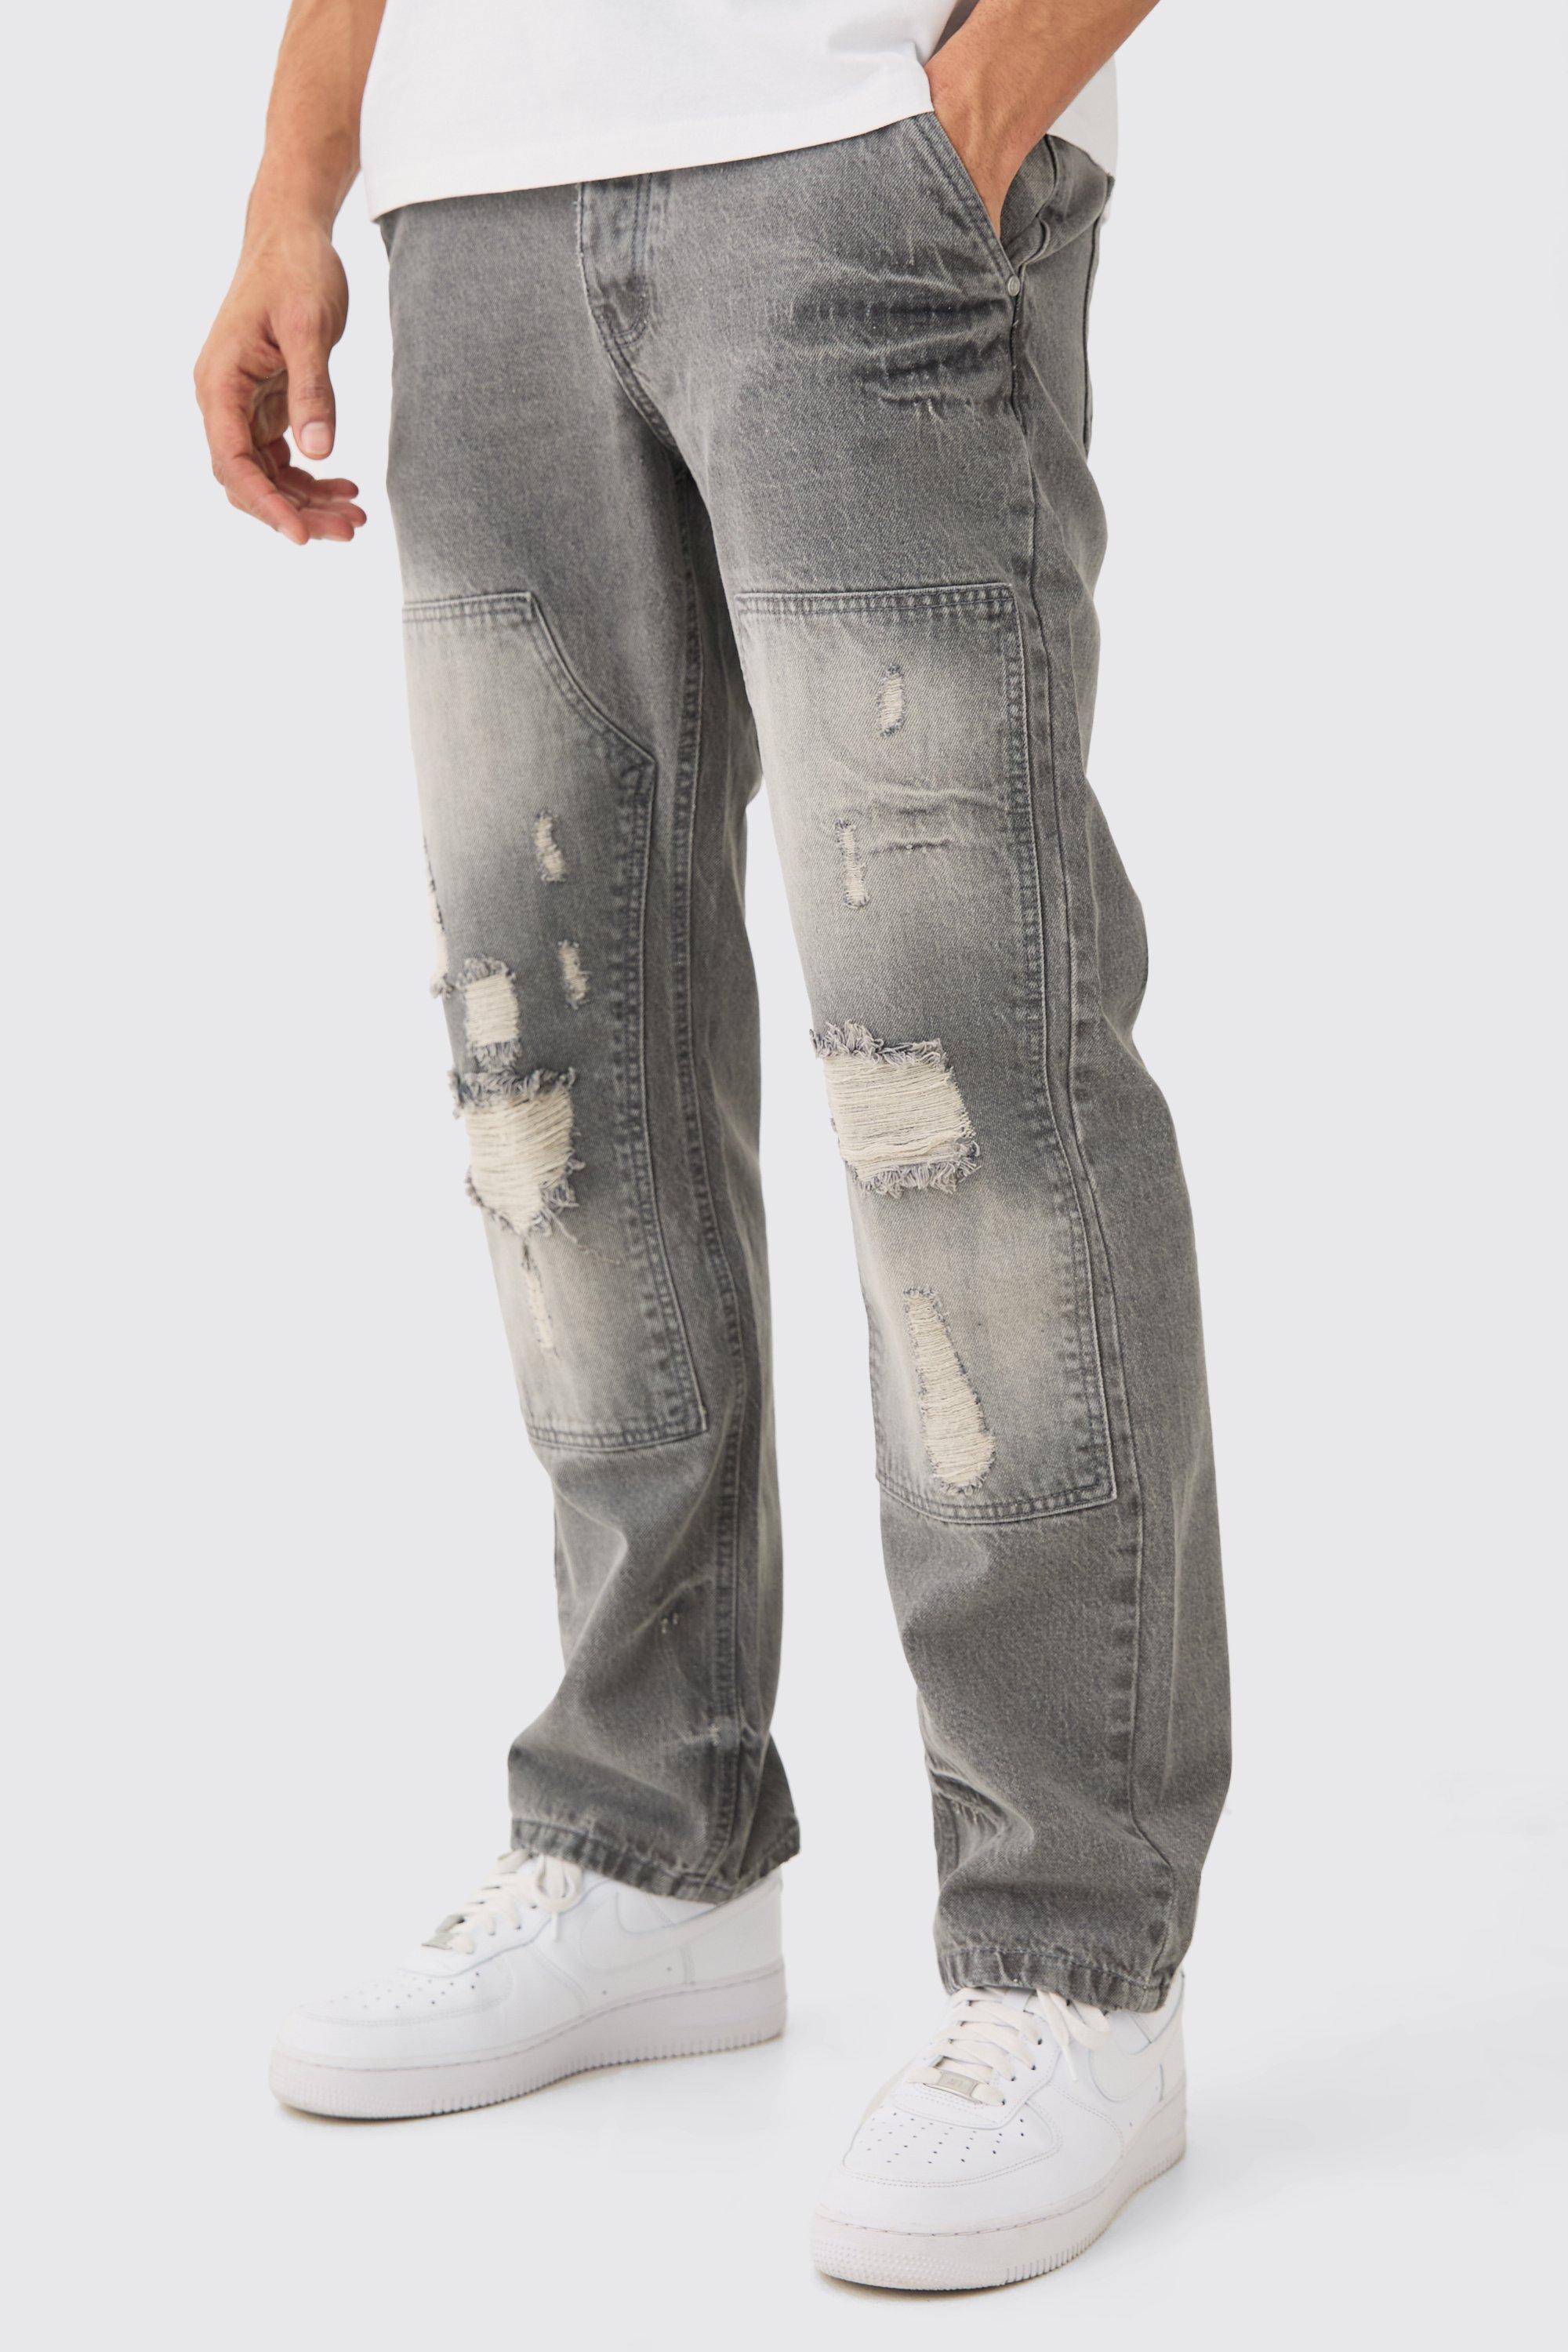 Image of Relaxed Rigid Ripped Carpenter Jeans In Mid Grey, Grigio